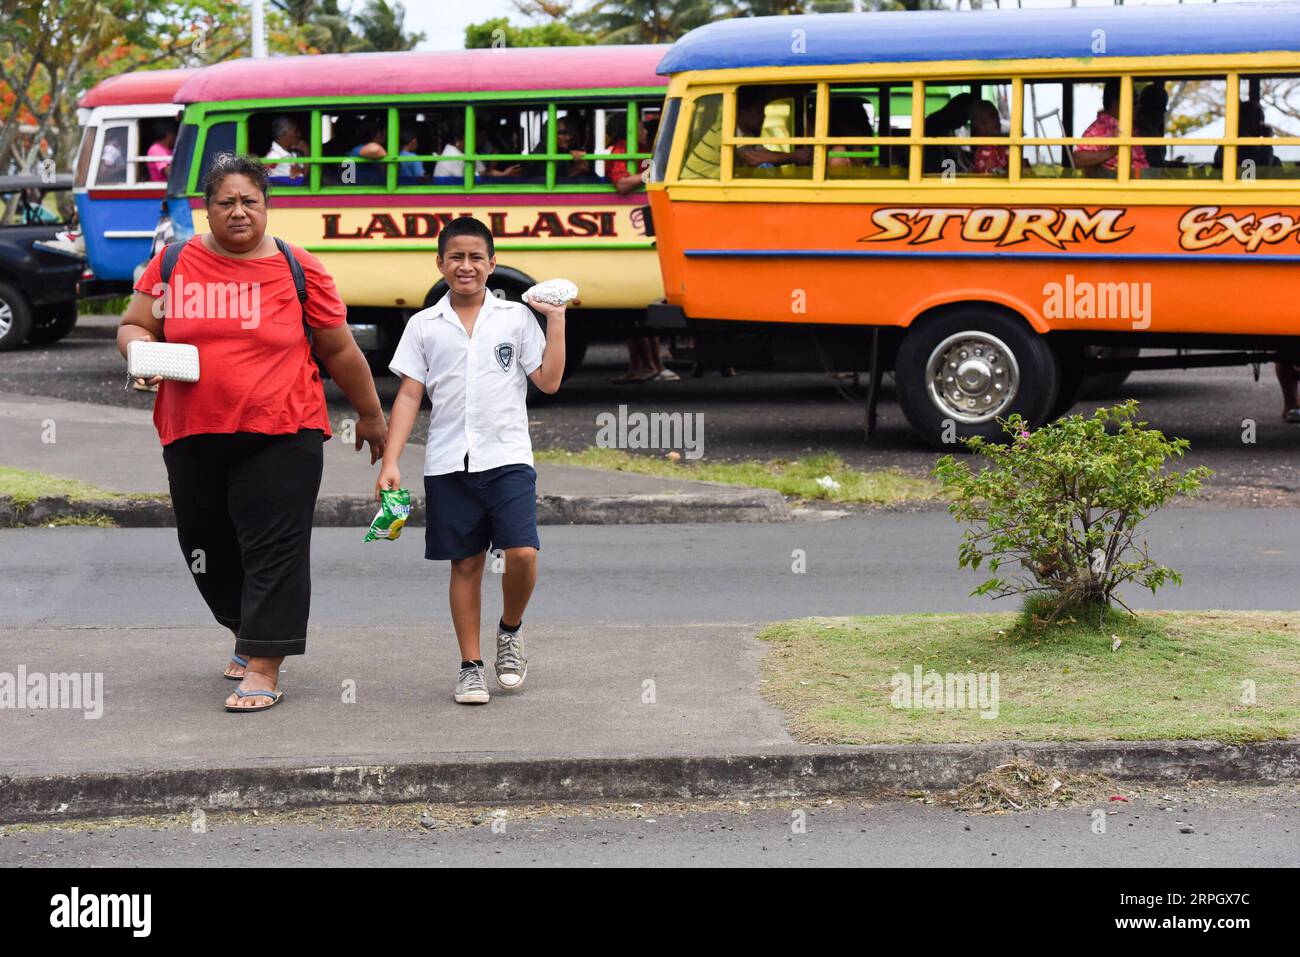 191023 -- APIA, Oct. 23, 2019 -- A woman and a boy get off from a public bus at the main bus station of Apia, capital of Samoa, Oct. 21, 2019. Most public buses in Samoa have been refitted from used trucks imported from overseas. Often featuring wild colours and creative body paintings, the buses make an attractive vista in this island country. For ventilation purposes, there are typically no window glasses in a bus passenger section and its rear end is openable. As the buses tend to go slowly on the island s bumpy mountainous roads, any sensible passenger would not choose to stand in the buse Stock Photo